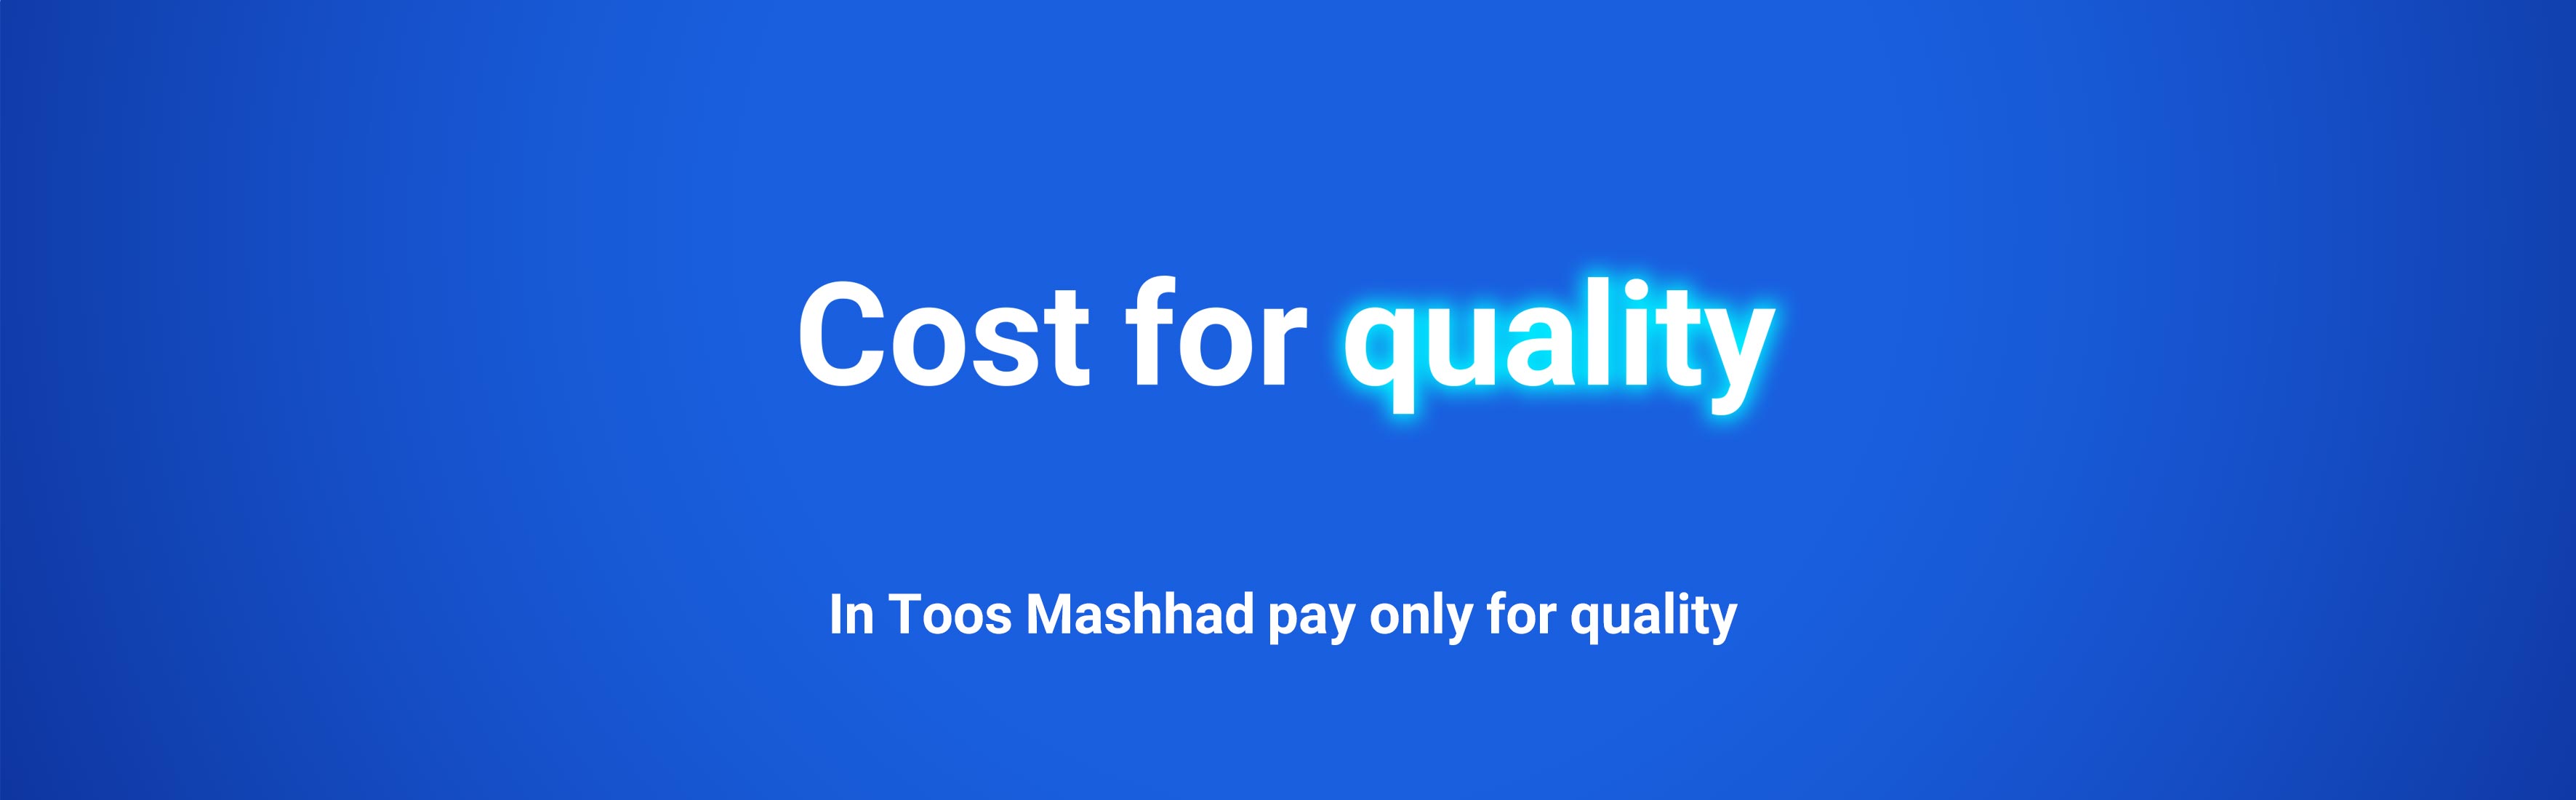 Cost for quality